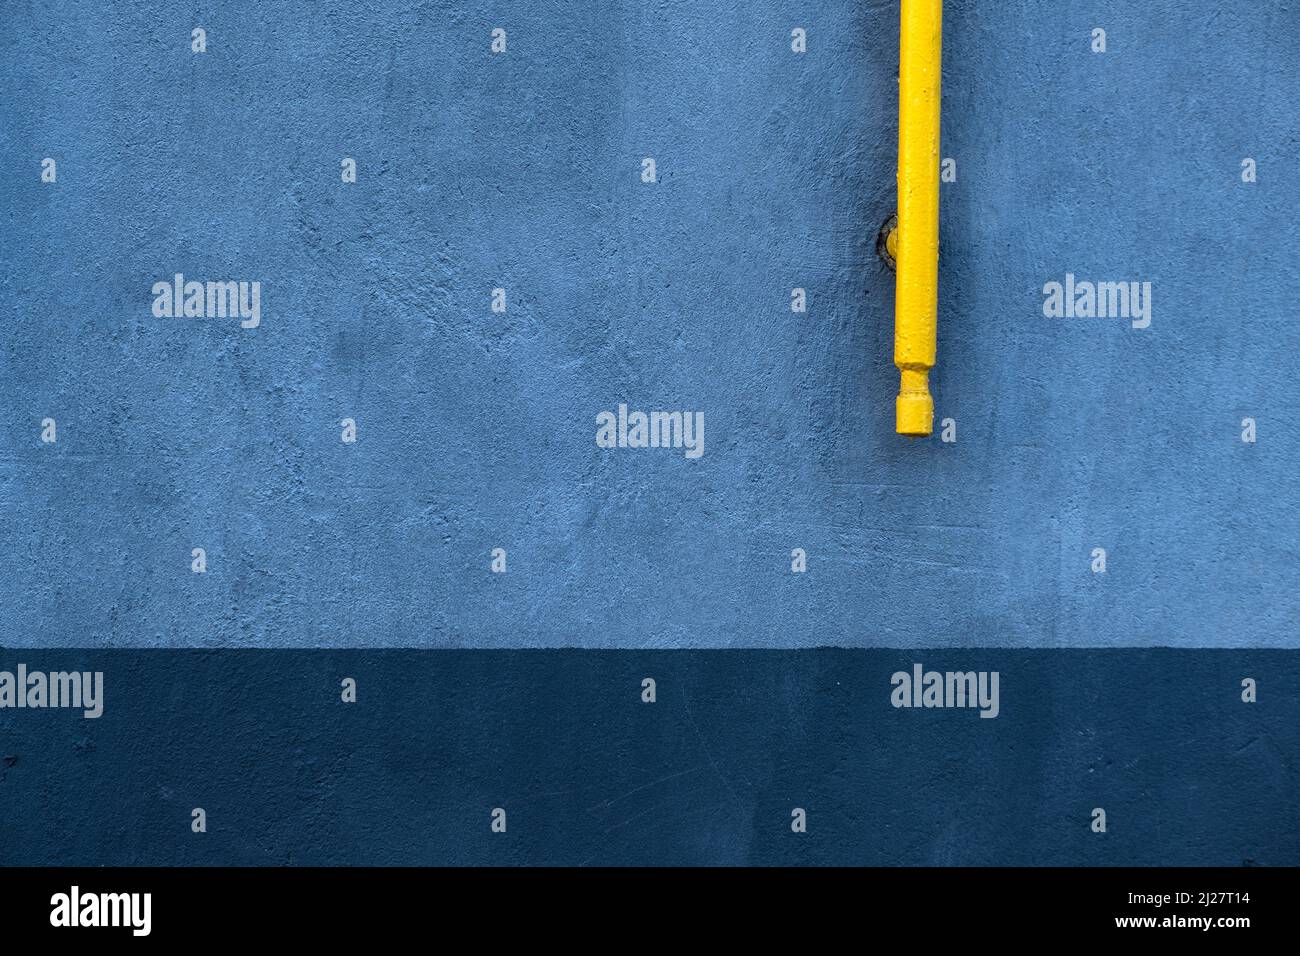 Abstract urban background with blue concrete wall texture and yellow metal pipe Stock Photo